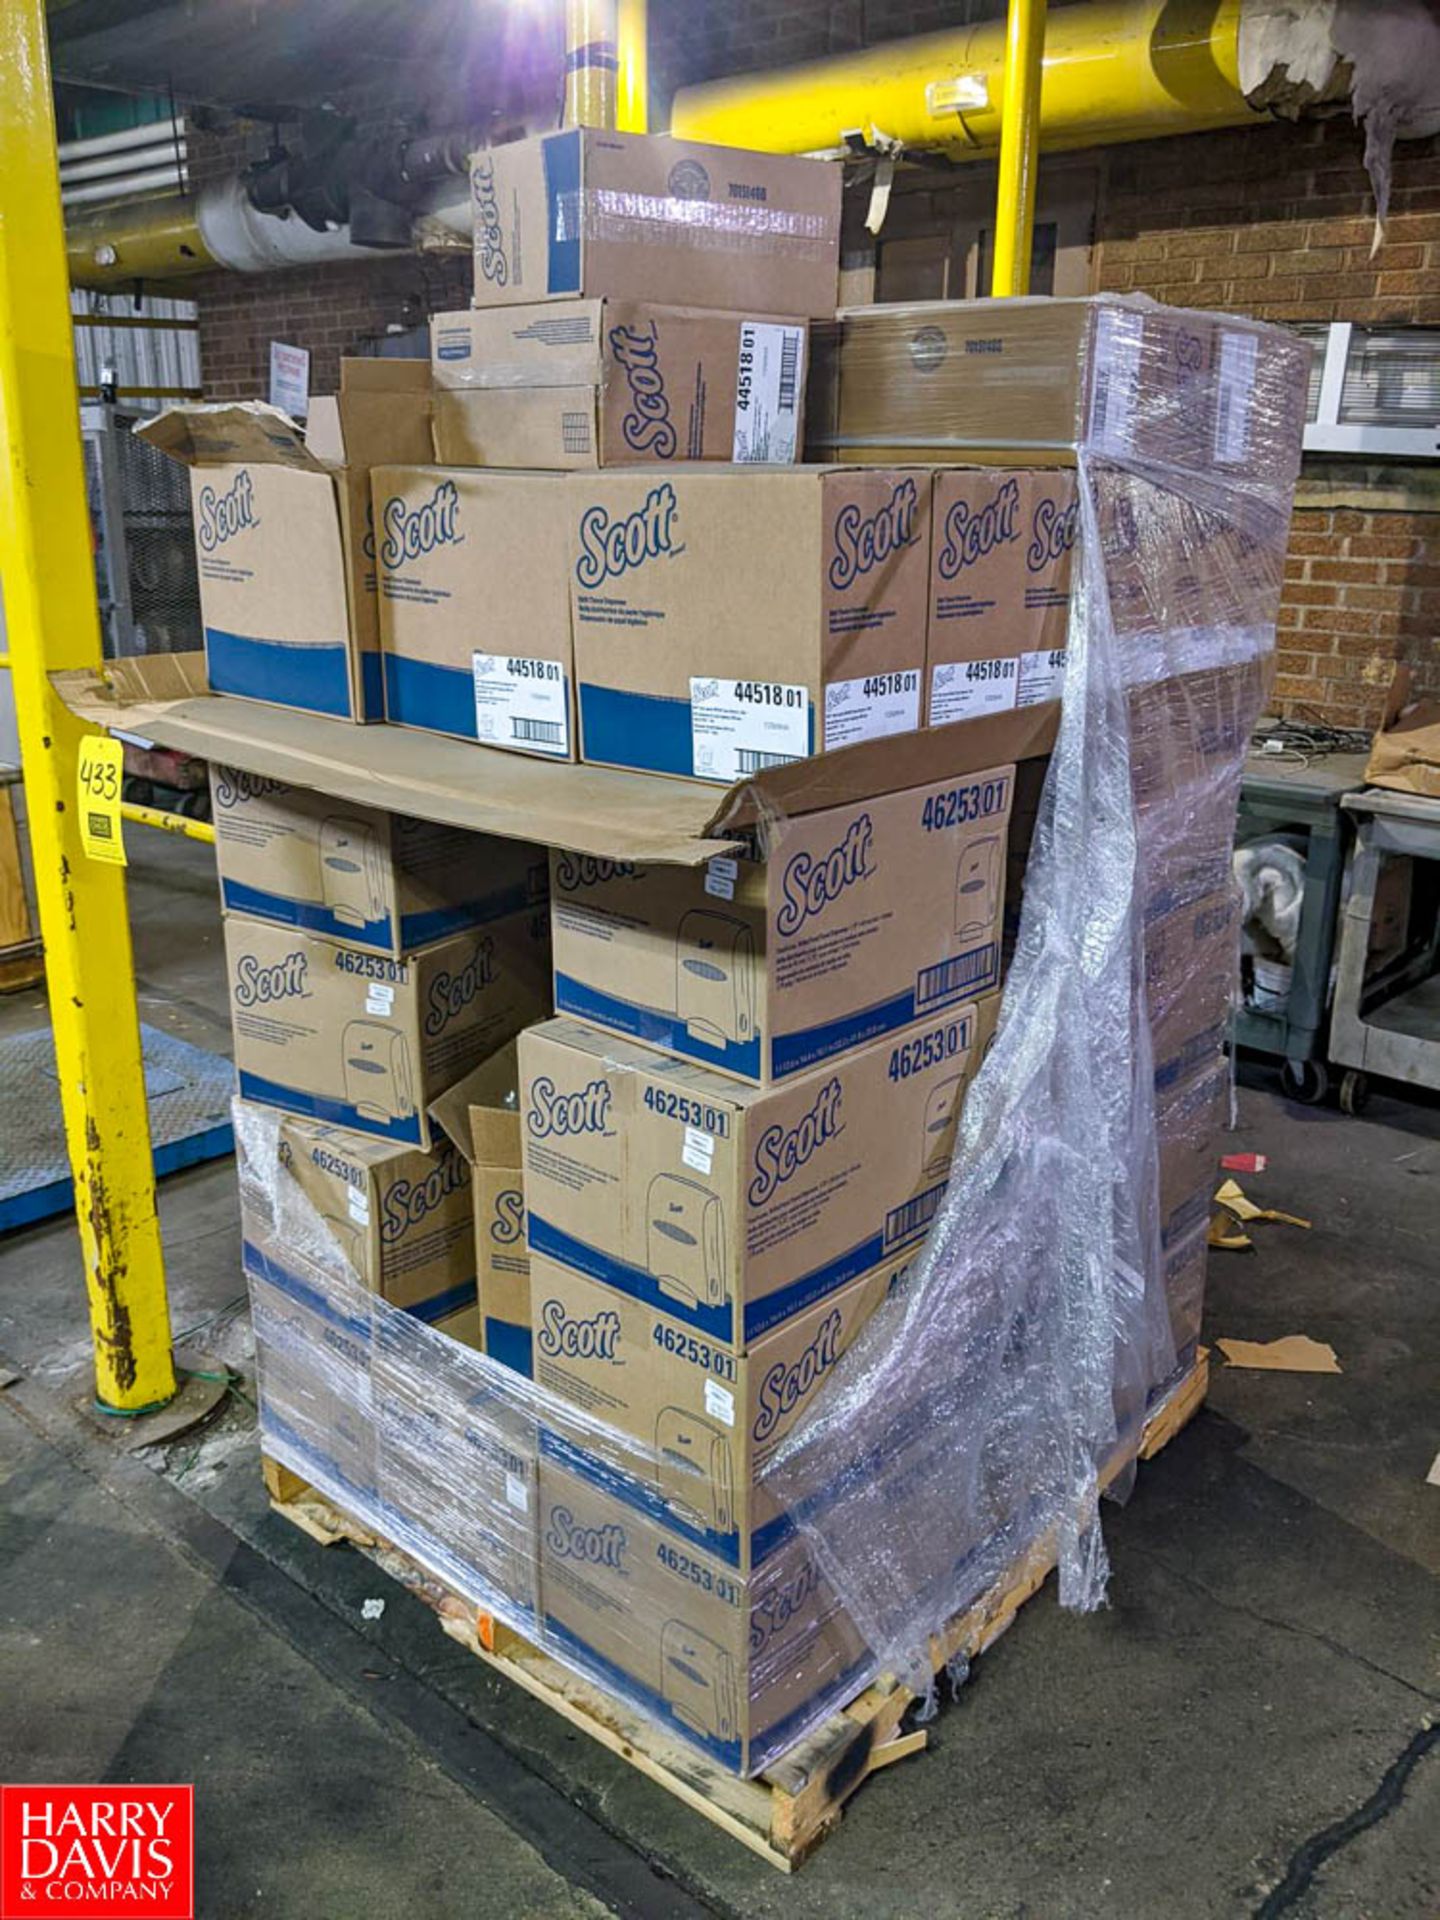 Pallet of Scott Touchless Rolled Hand Towel Dispensers & Bath Tissue Dispensers (Loc. Dock)